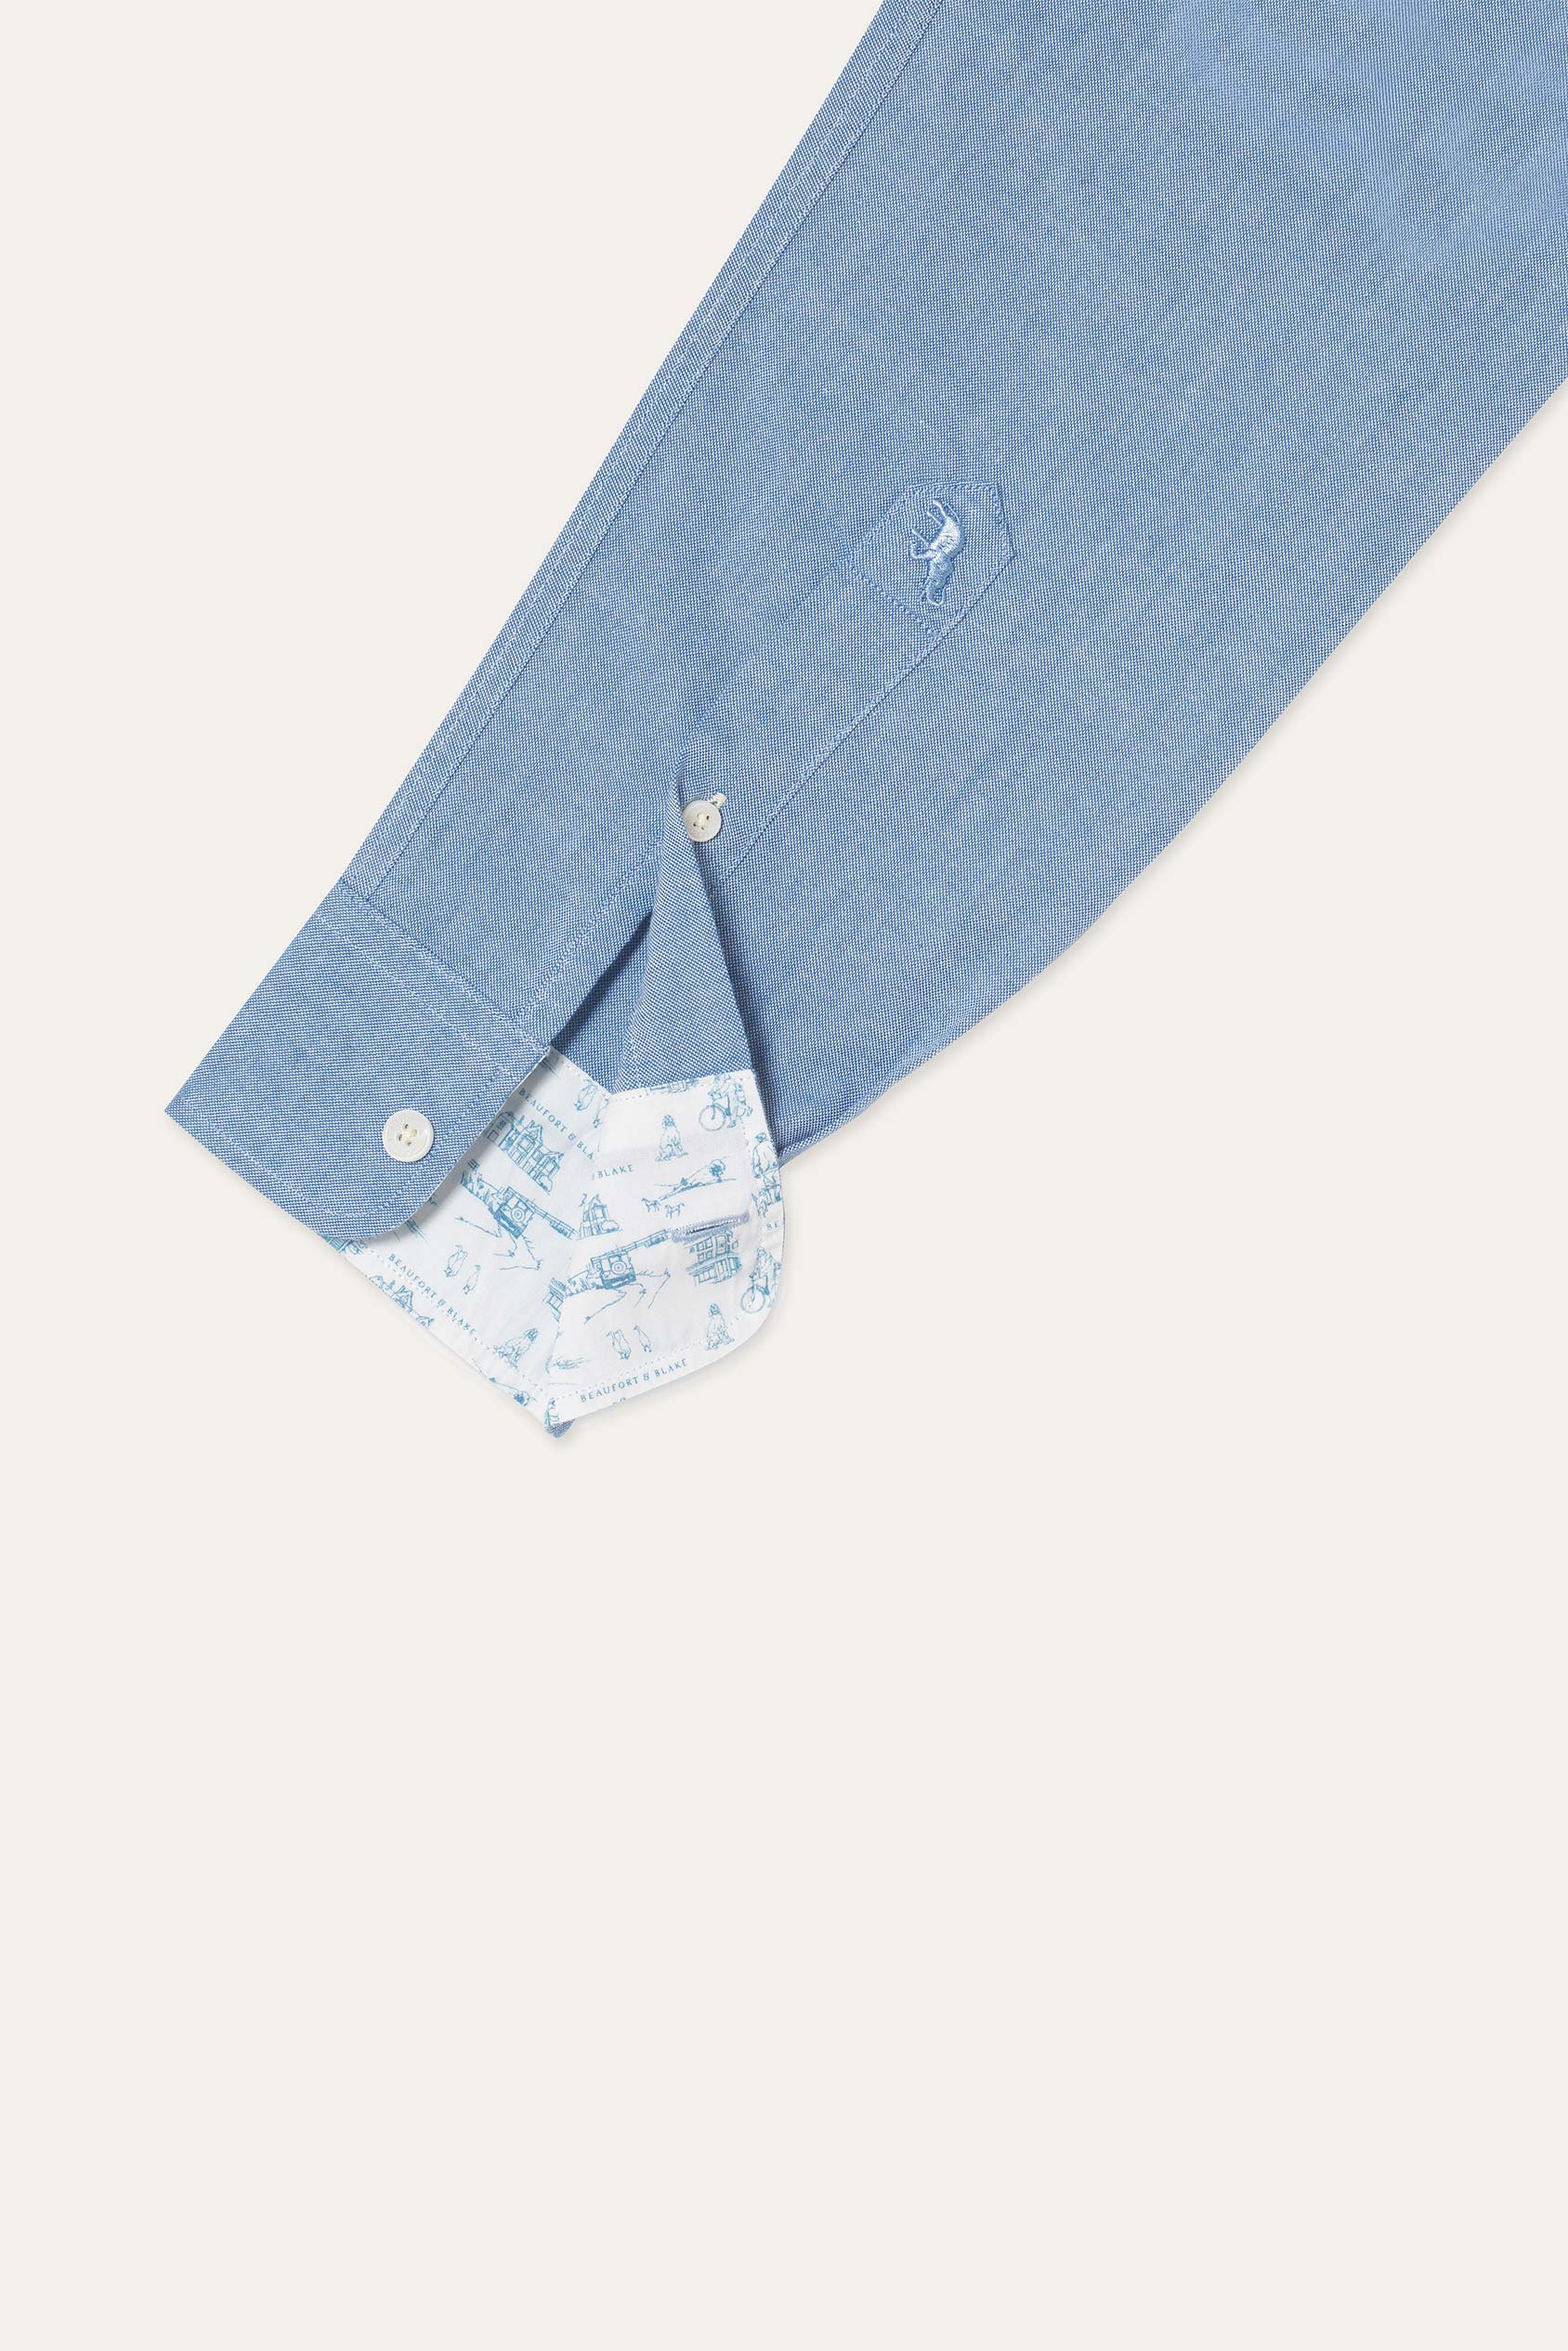 A vintage-wash blue Men’s Oxford Shirt. 100% Cotton. Subtle Beaufort embroidery and a button-down collar adds to the design. Classic style. Made in Portugal. Machine wash. Size S, M, L, XL, XXL.